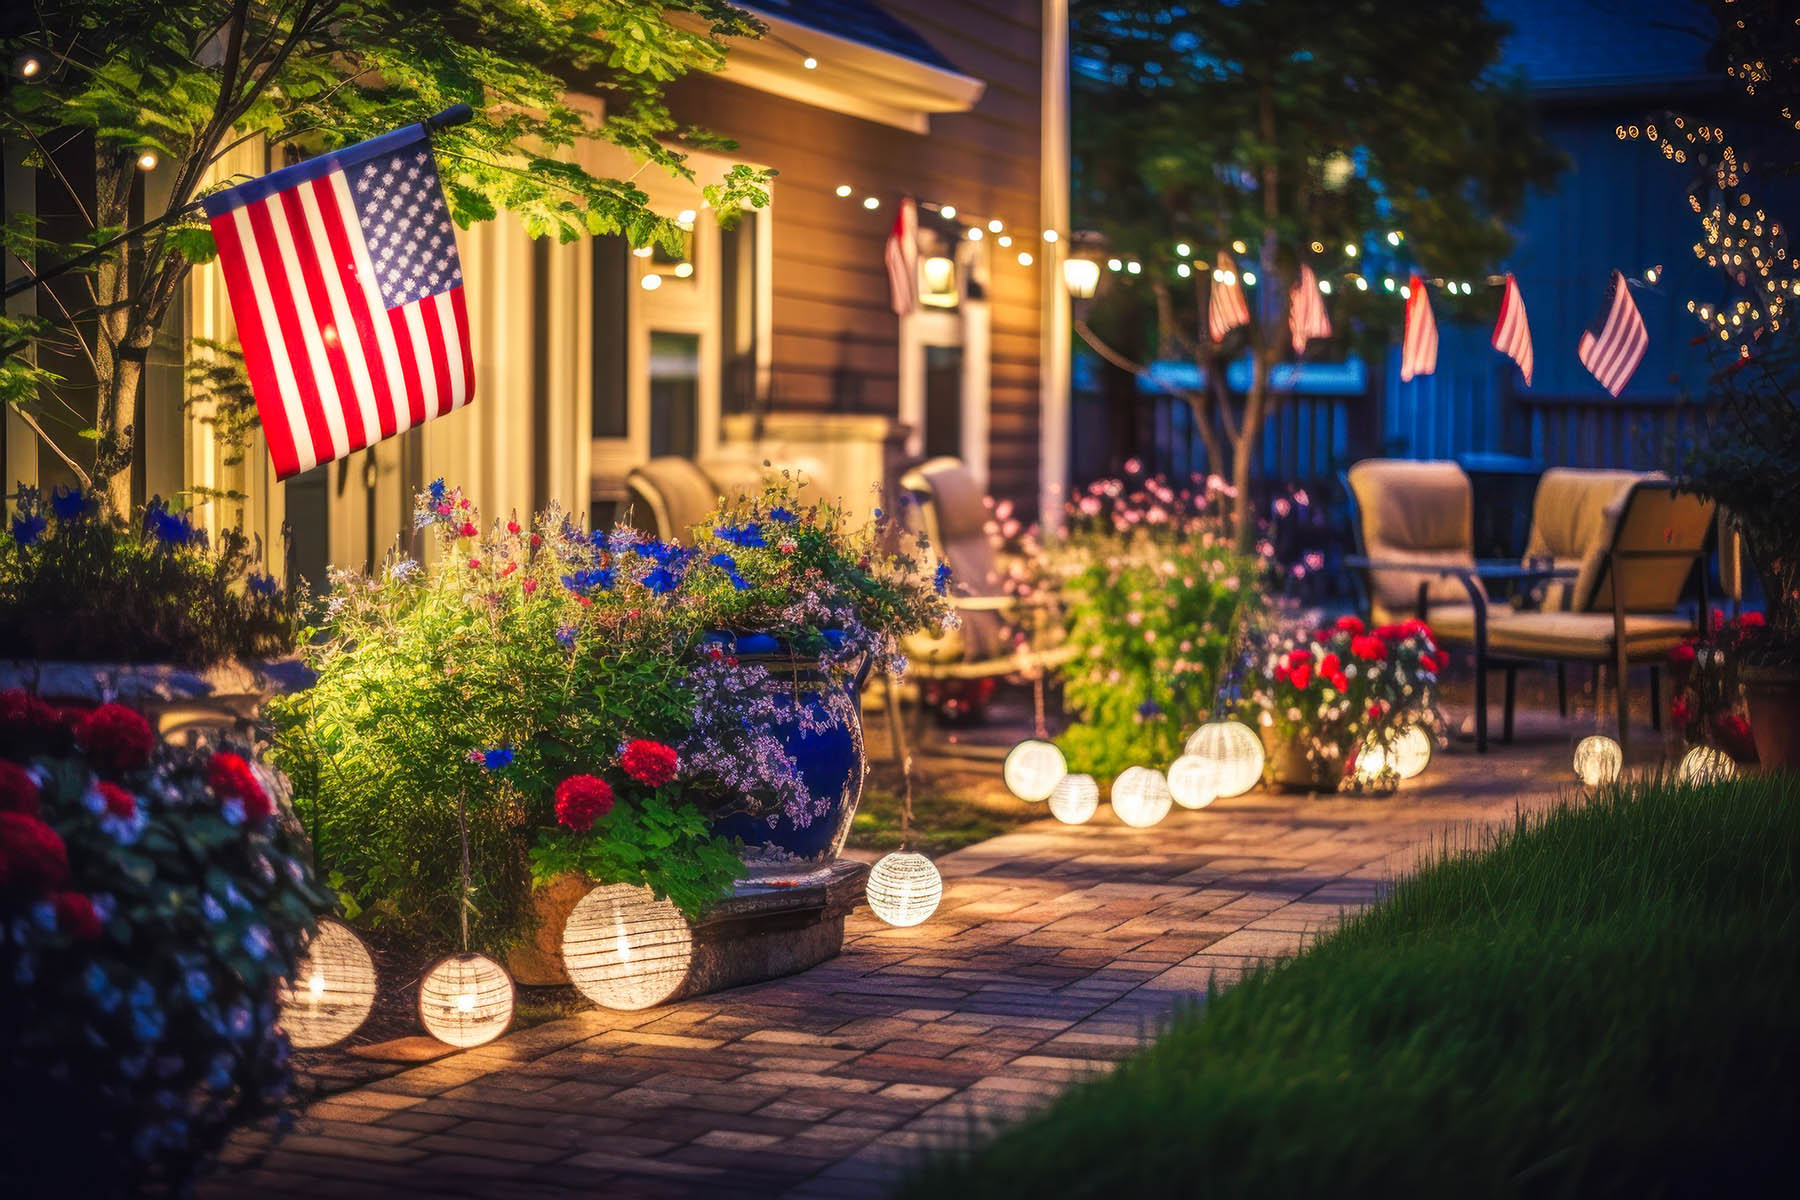 Patriotic Glow: Fourth of July Lighting Ideas for Your Home and Garden